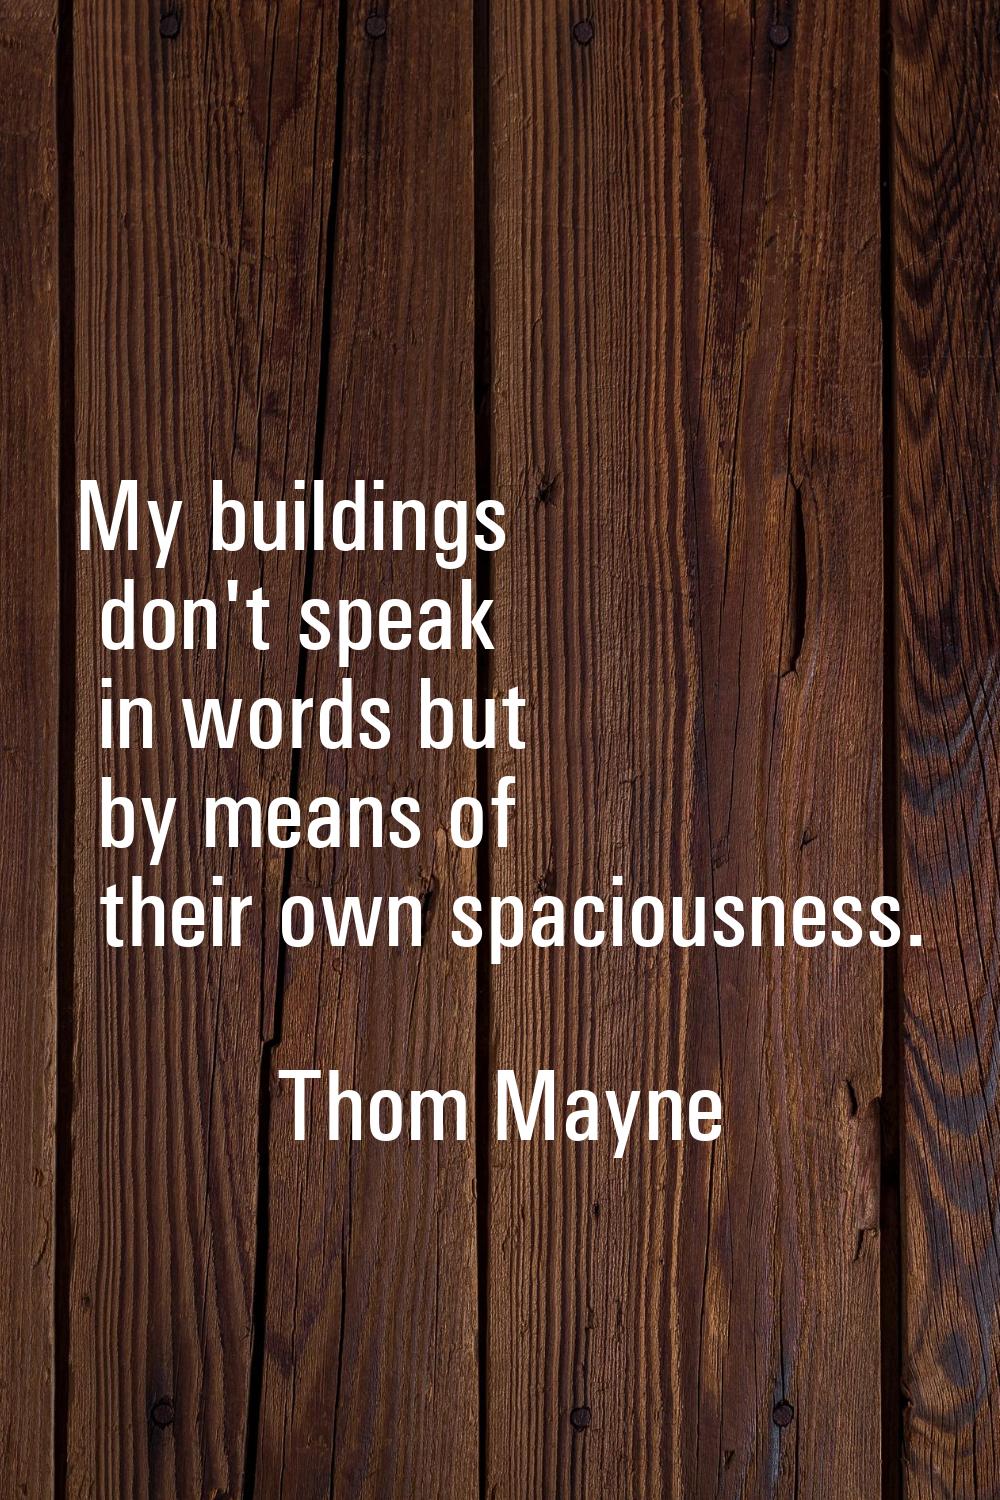 My buildings don't speak in words but by means of their own spaciousness.